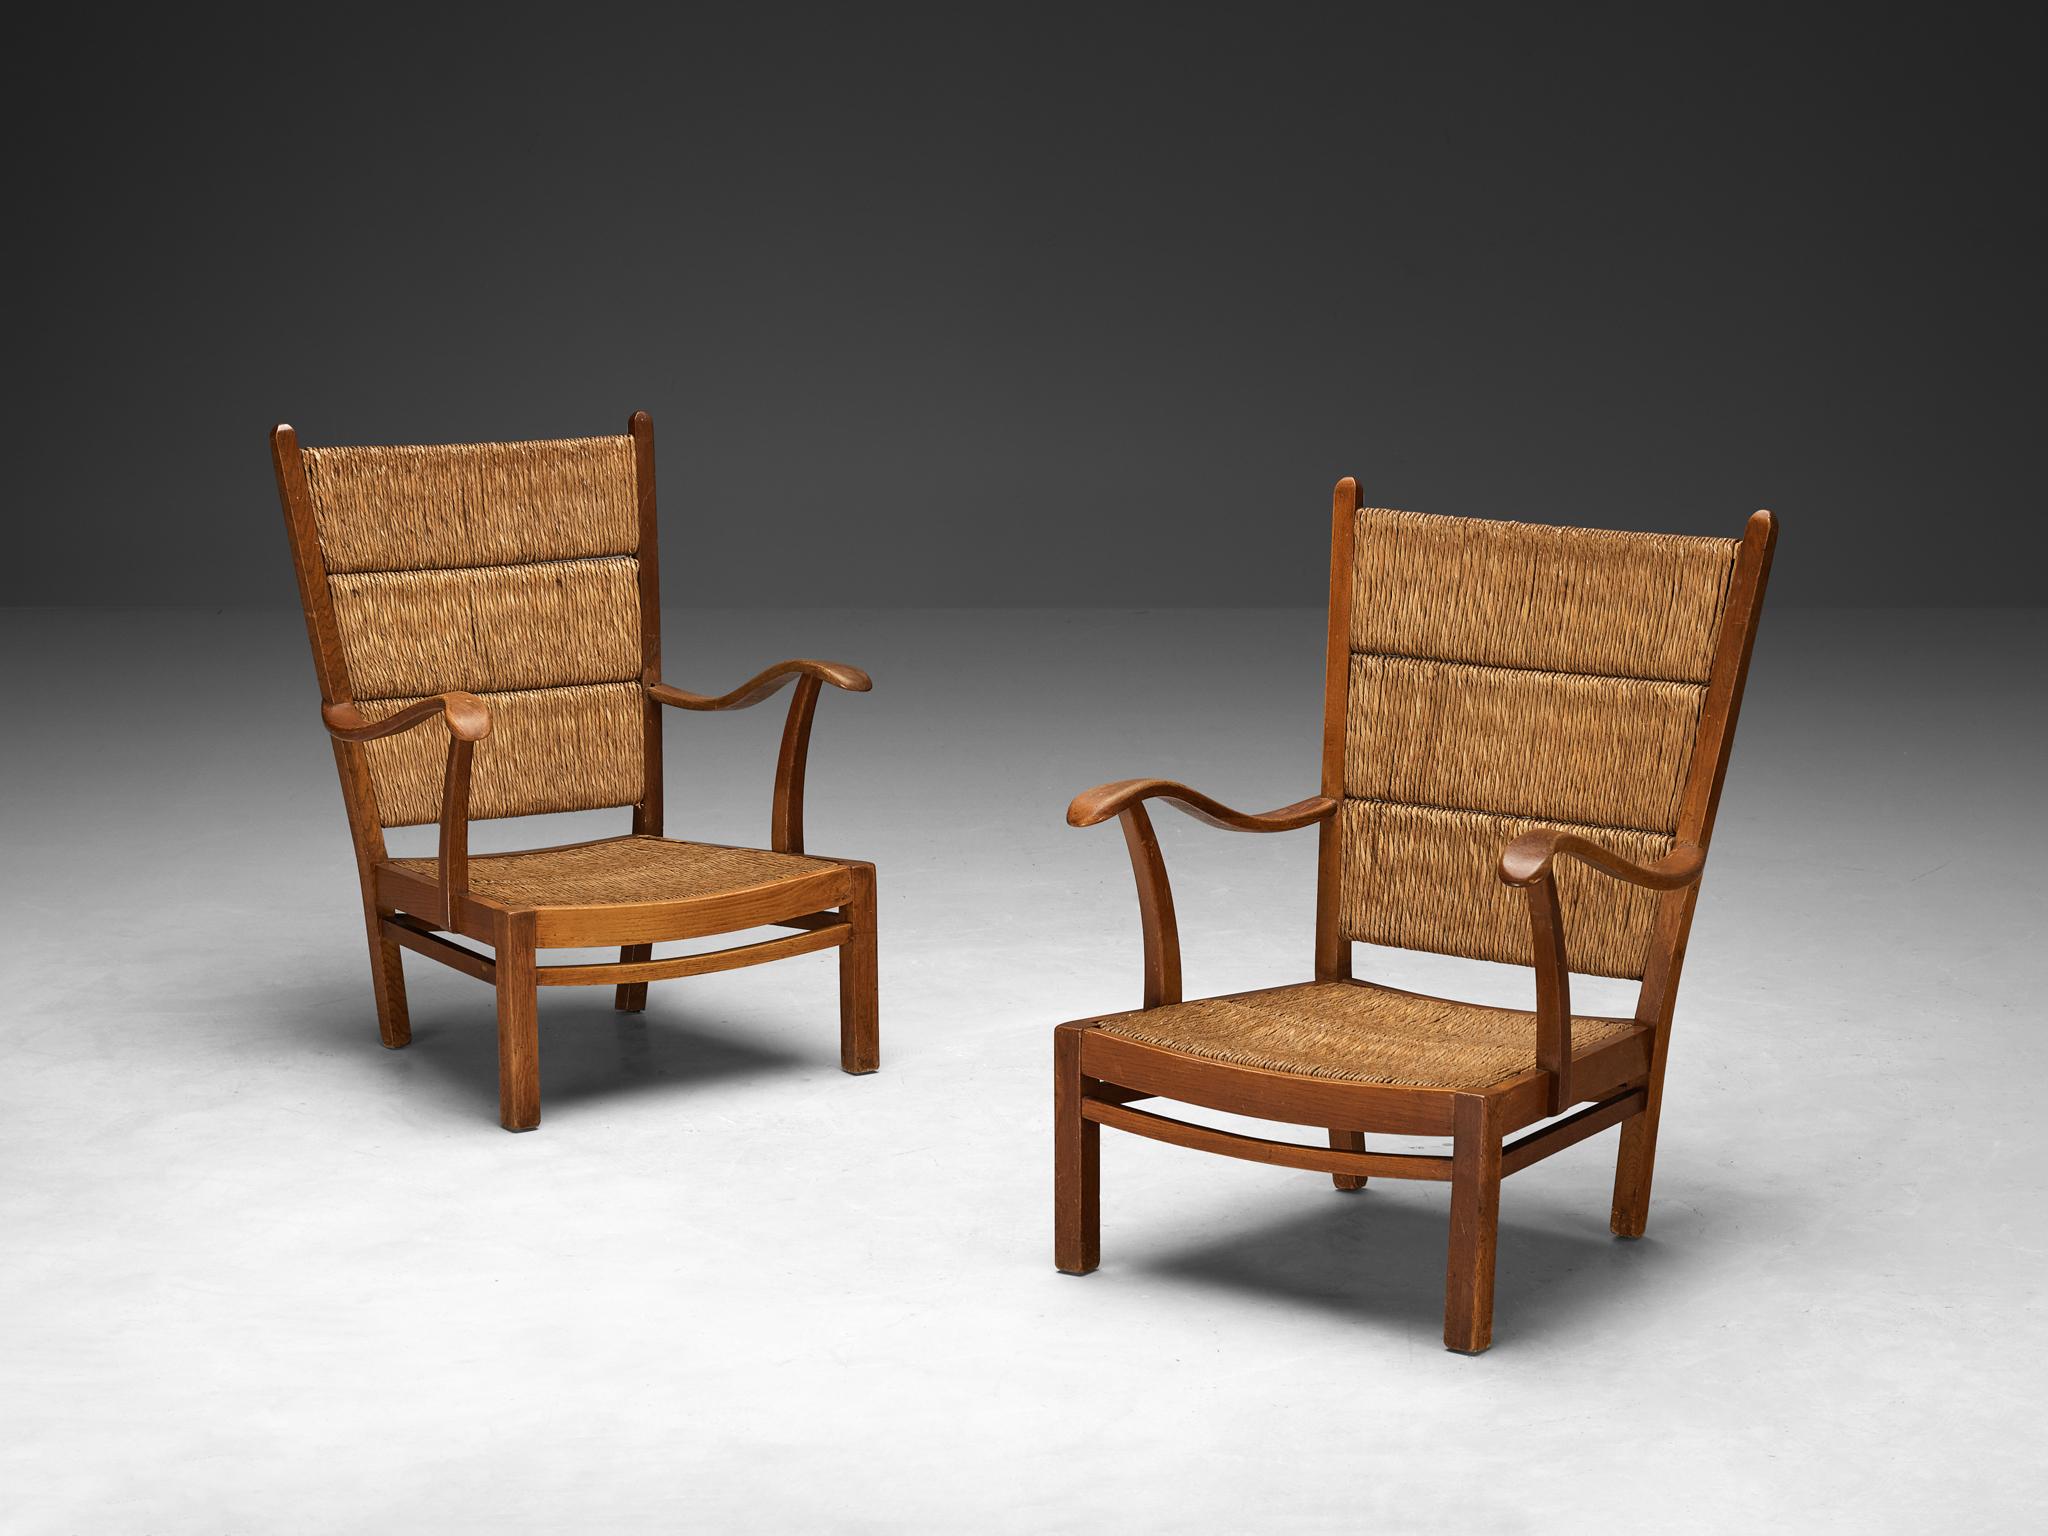 Pair of armchairs, straw, stained beech, The Netherlands, 1950s

These rustic armchairs originate from The Netherlands and epitomize an exquisite simplicity of remarkable quality. The straw backrests are made in three parts and show horizontal